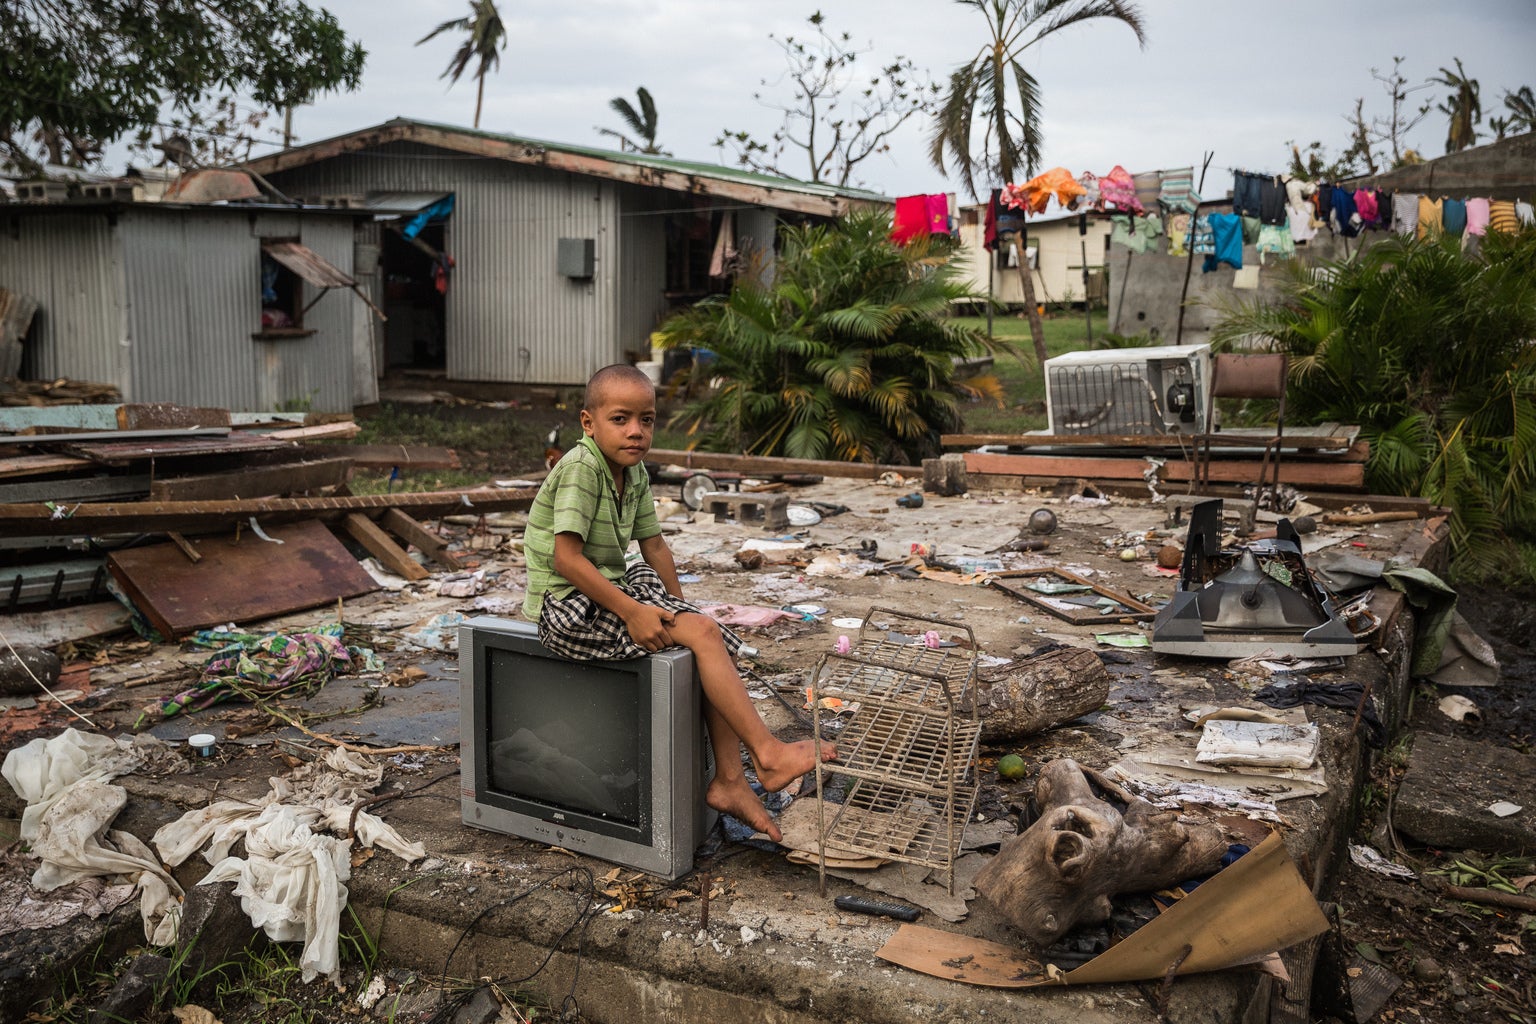 A boy is seating on a broken TV, surrounded by rubble